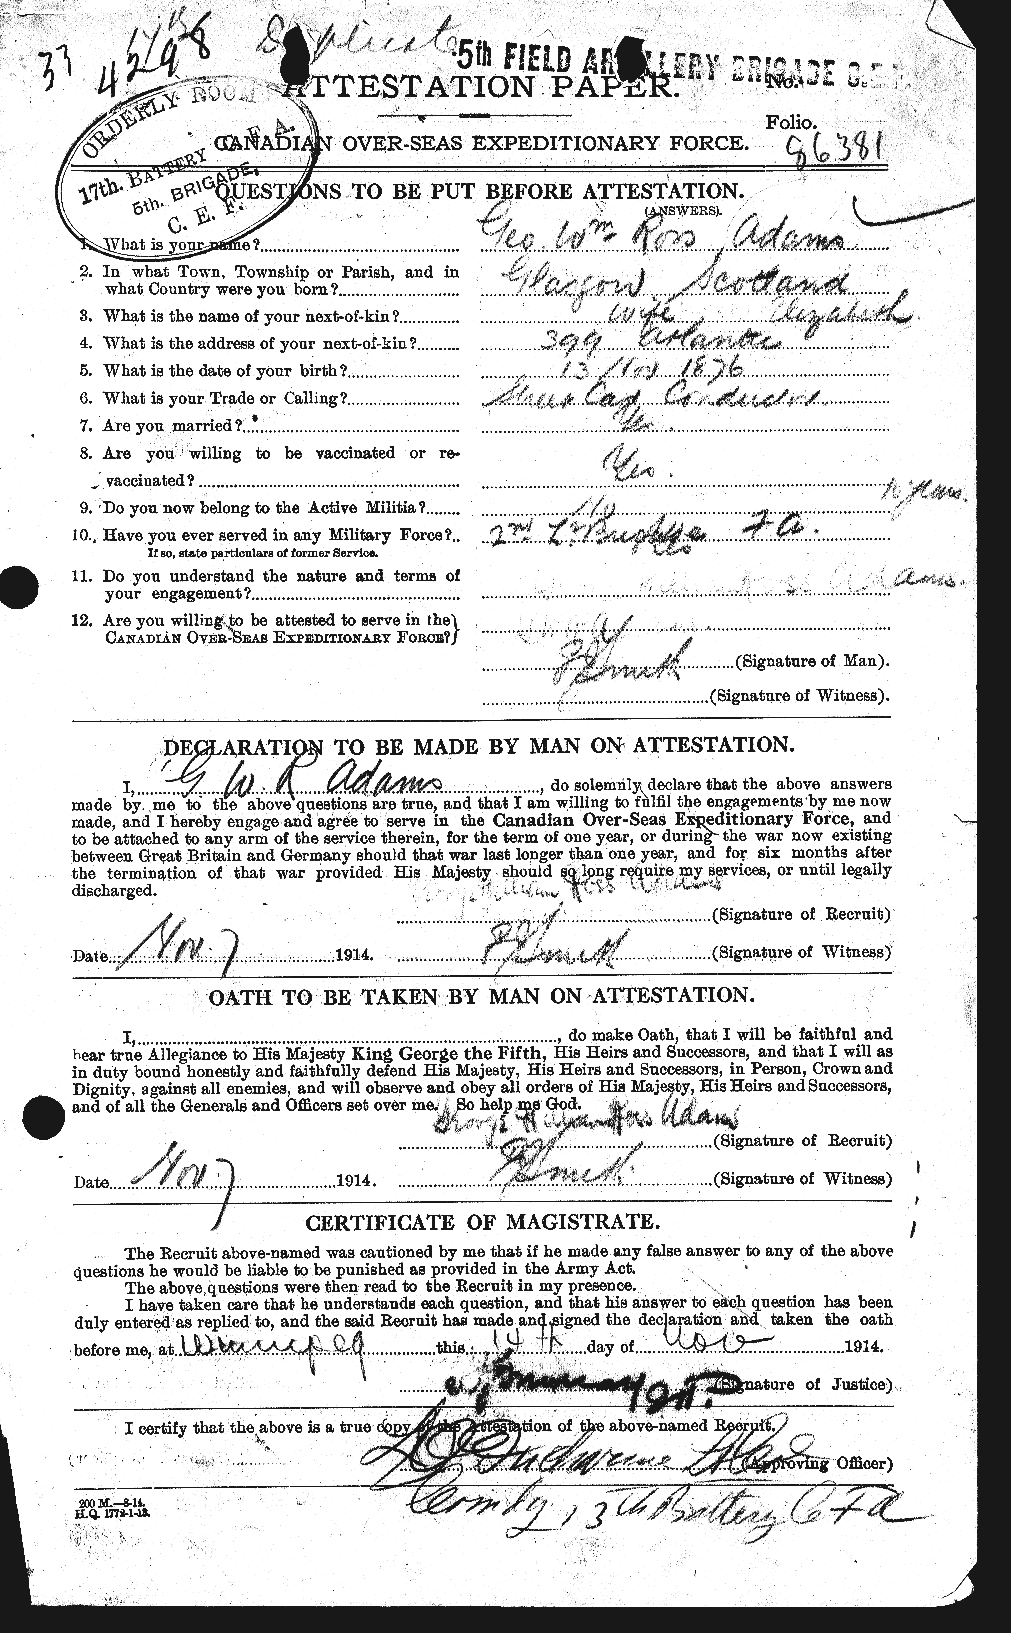 Personnel Records of the First World War - CEF 203128a